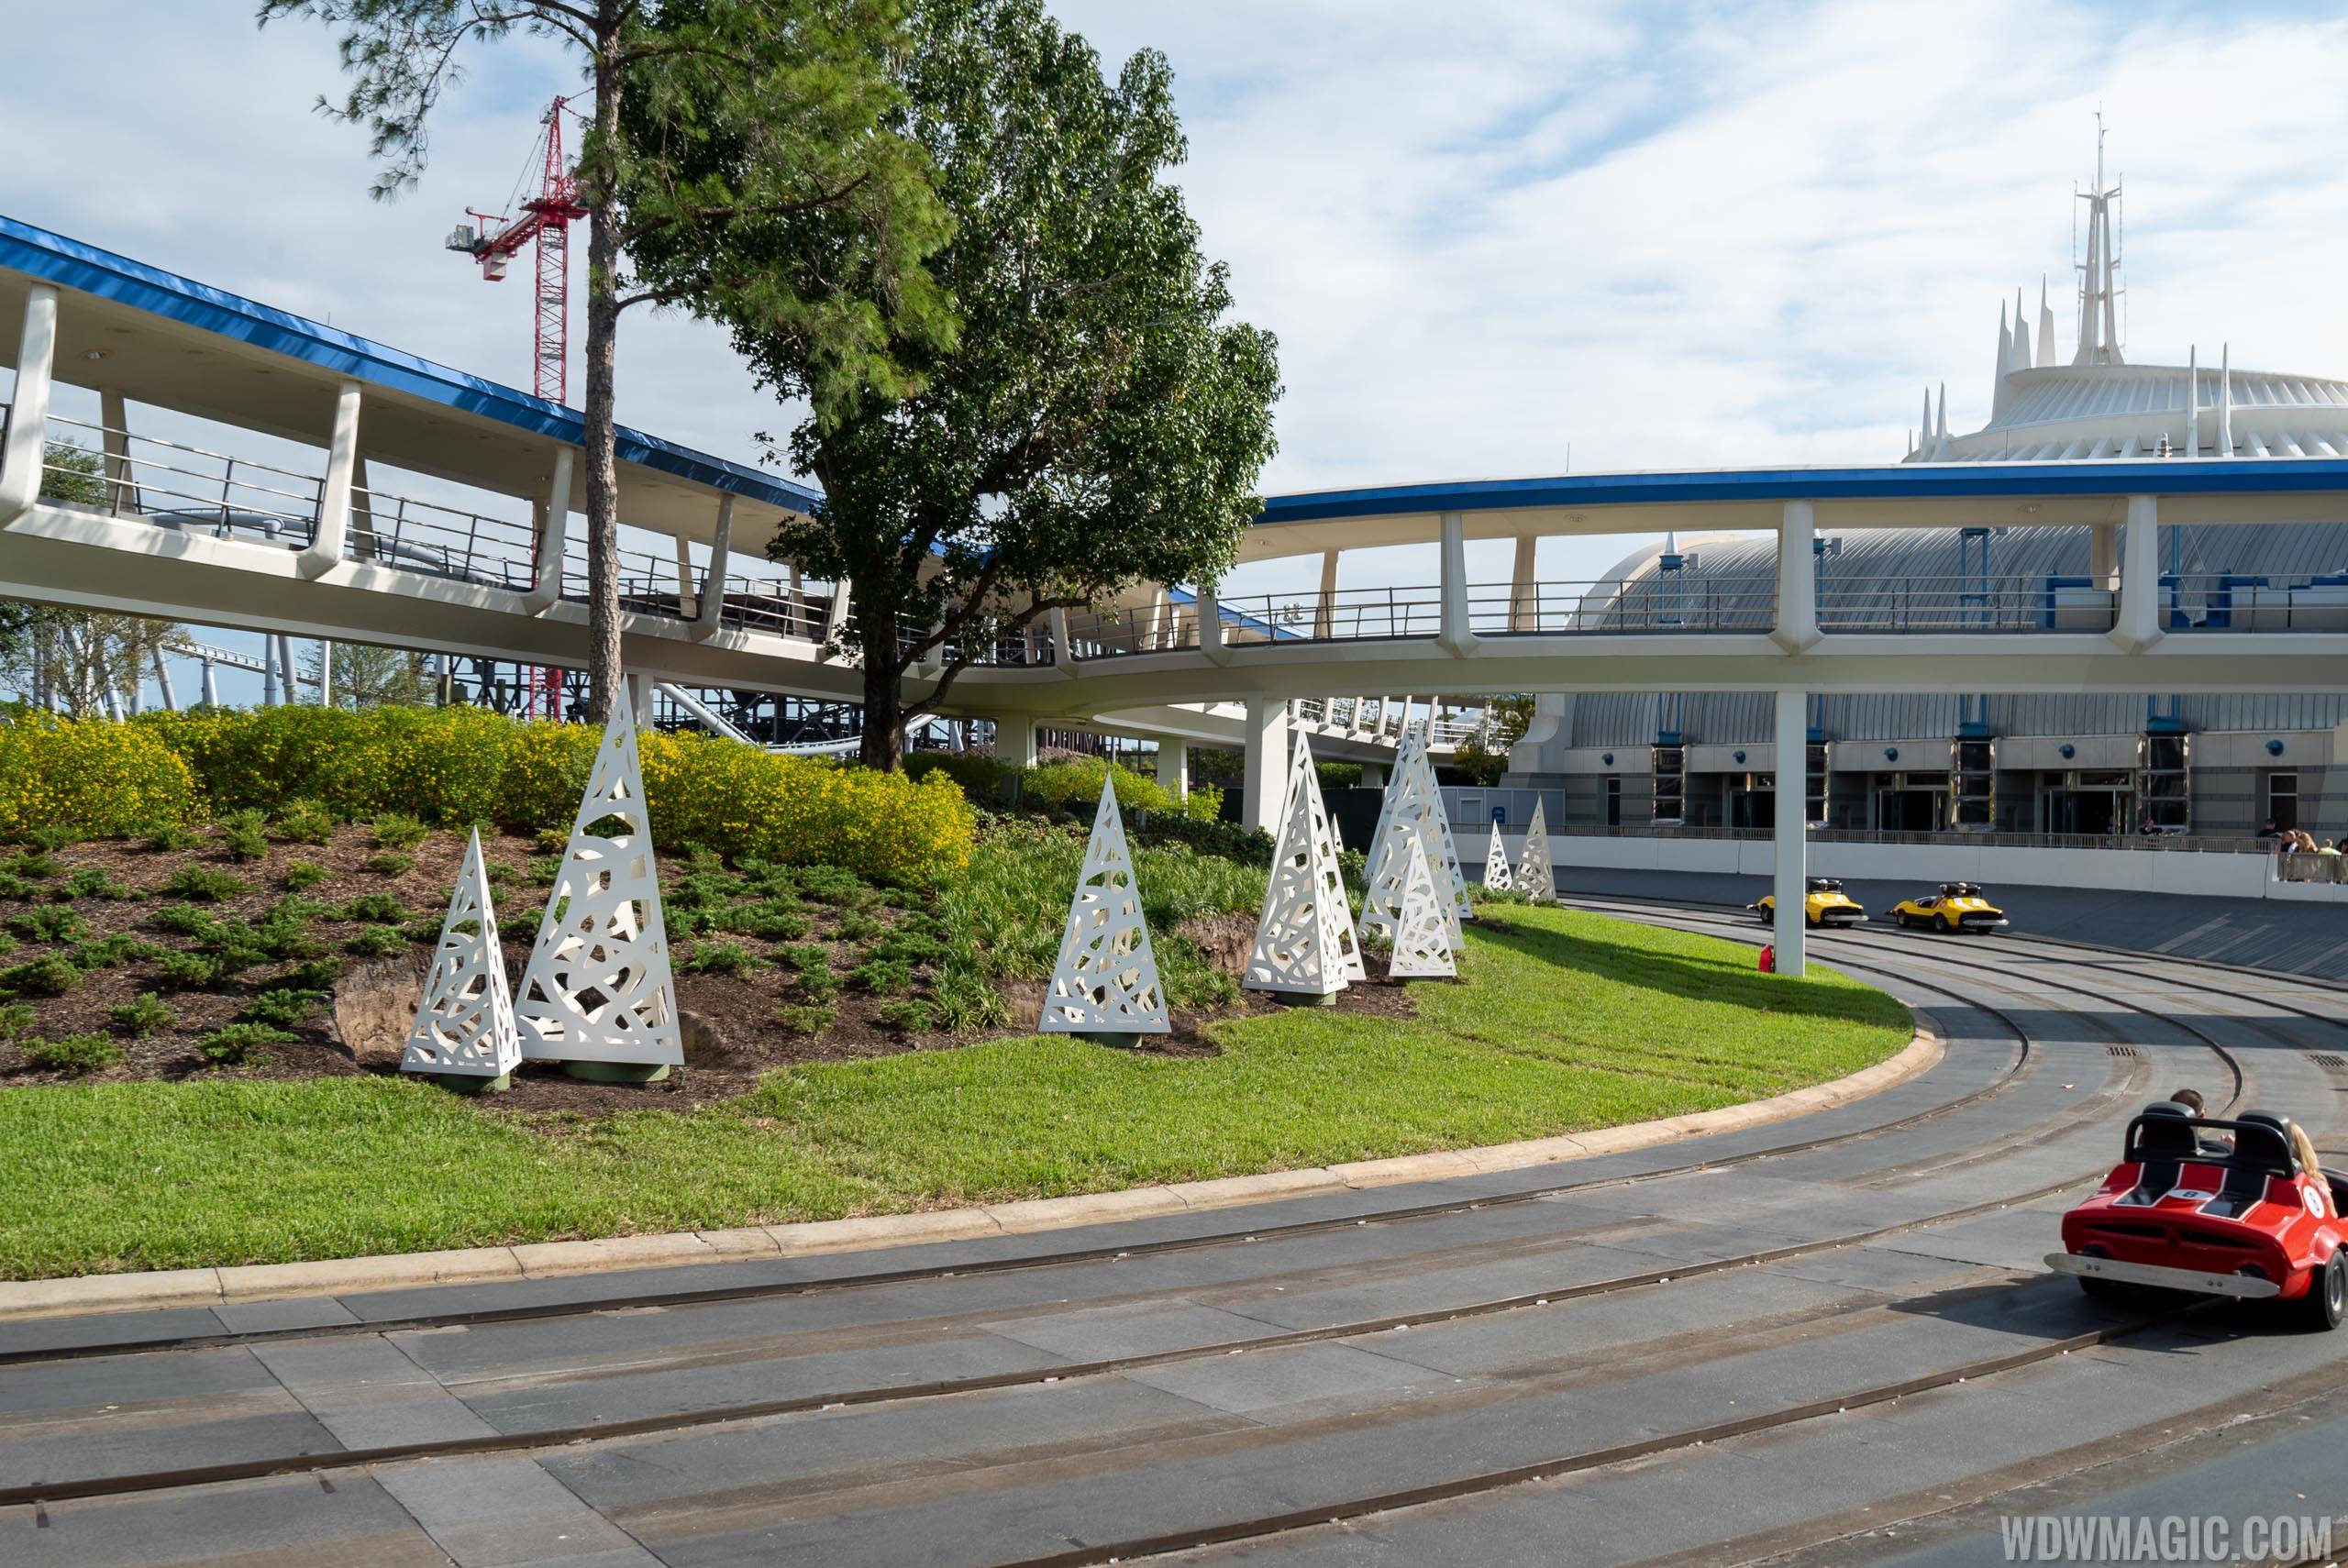 PHOTOS - Lighting structures installed at Tomorrowland Speedway for holiday overlay